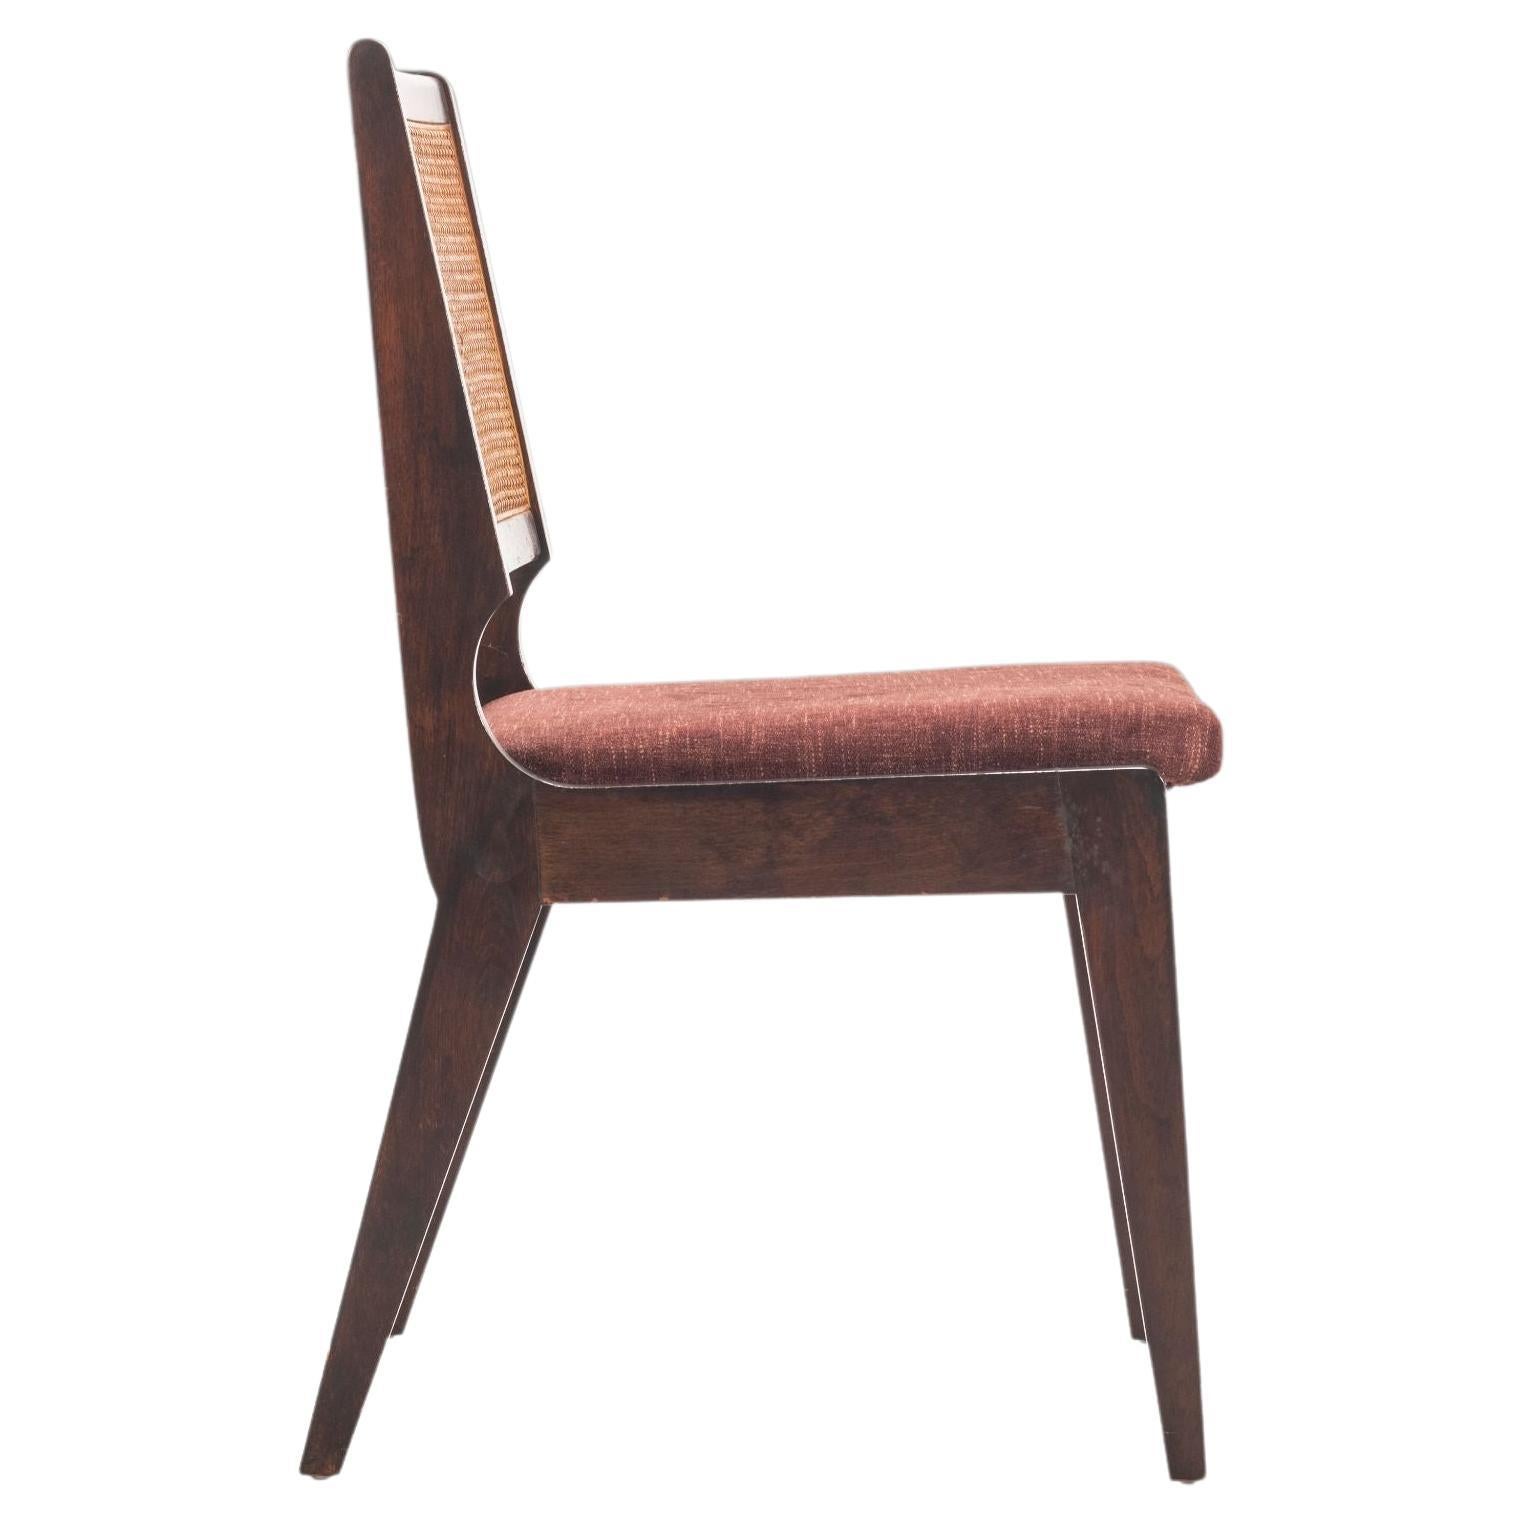 For your consideration is a sophisticated set of dining chairs in the manner of Edward Wormley. The original cane has aged to perfection with beautiful warm amber color. The ebonized frames have a patina adding to the worldly character of the set